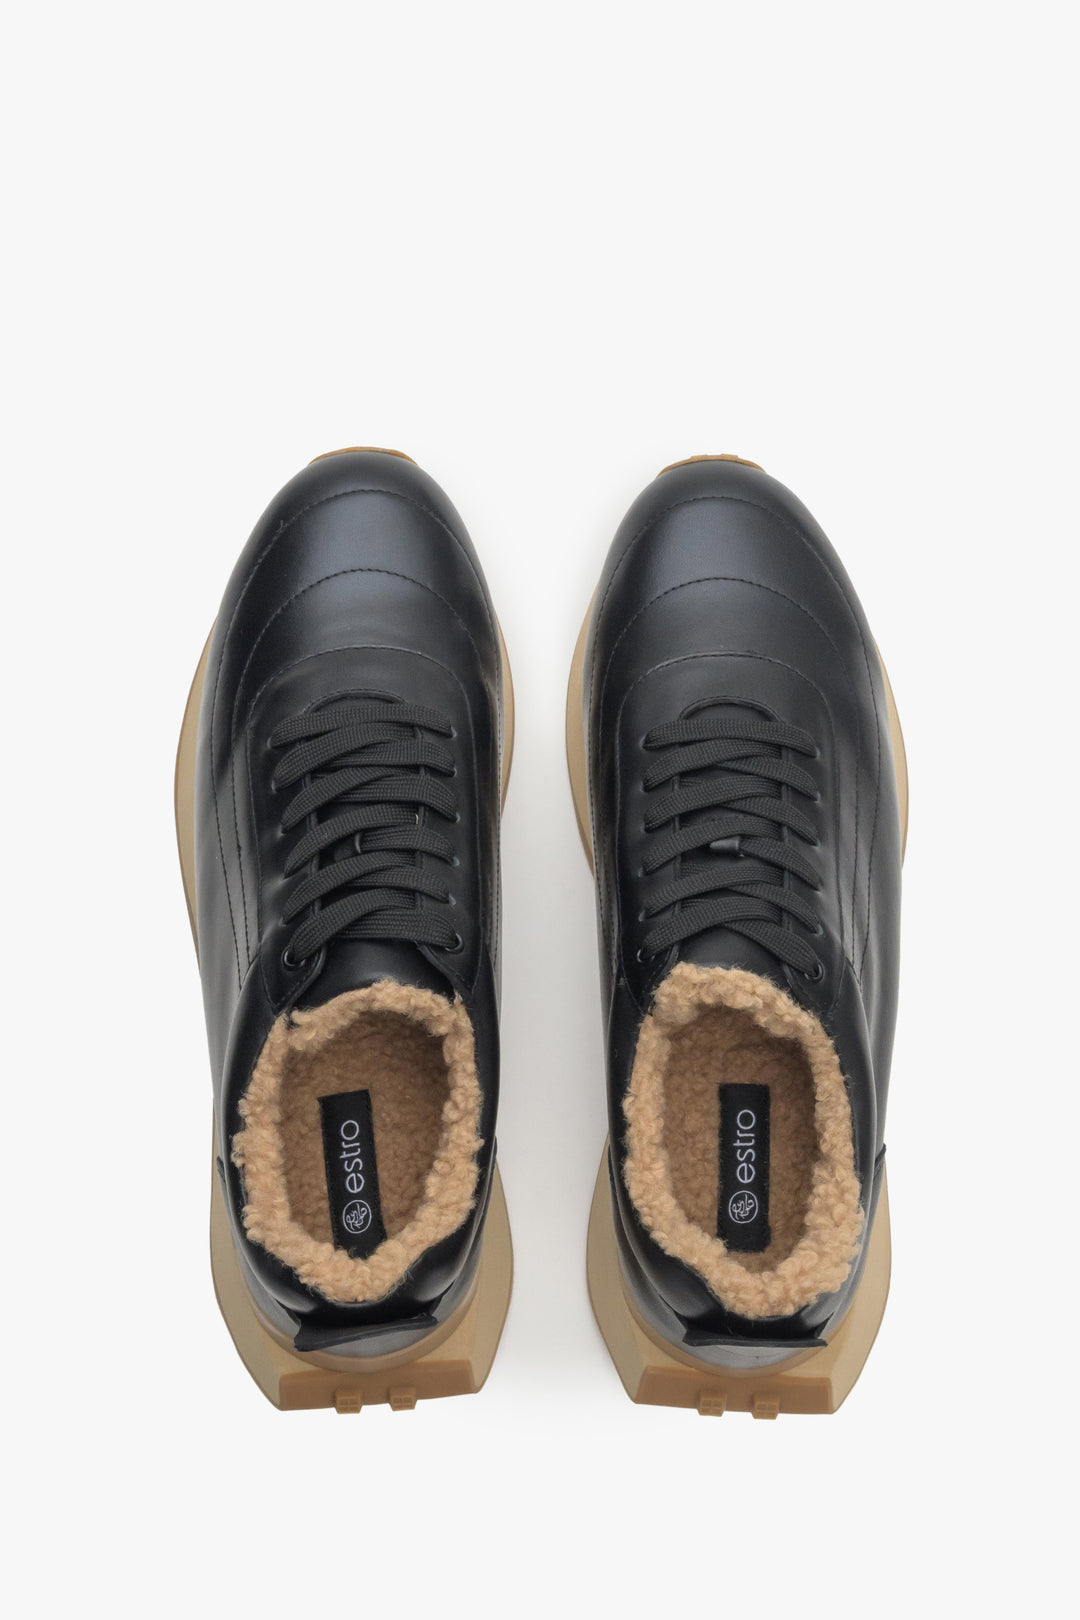 Women's leather black winter sneakers by Estro - top view presentation of the model.